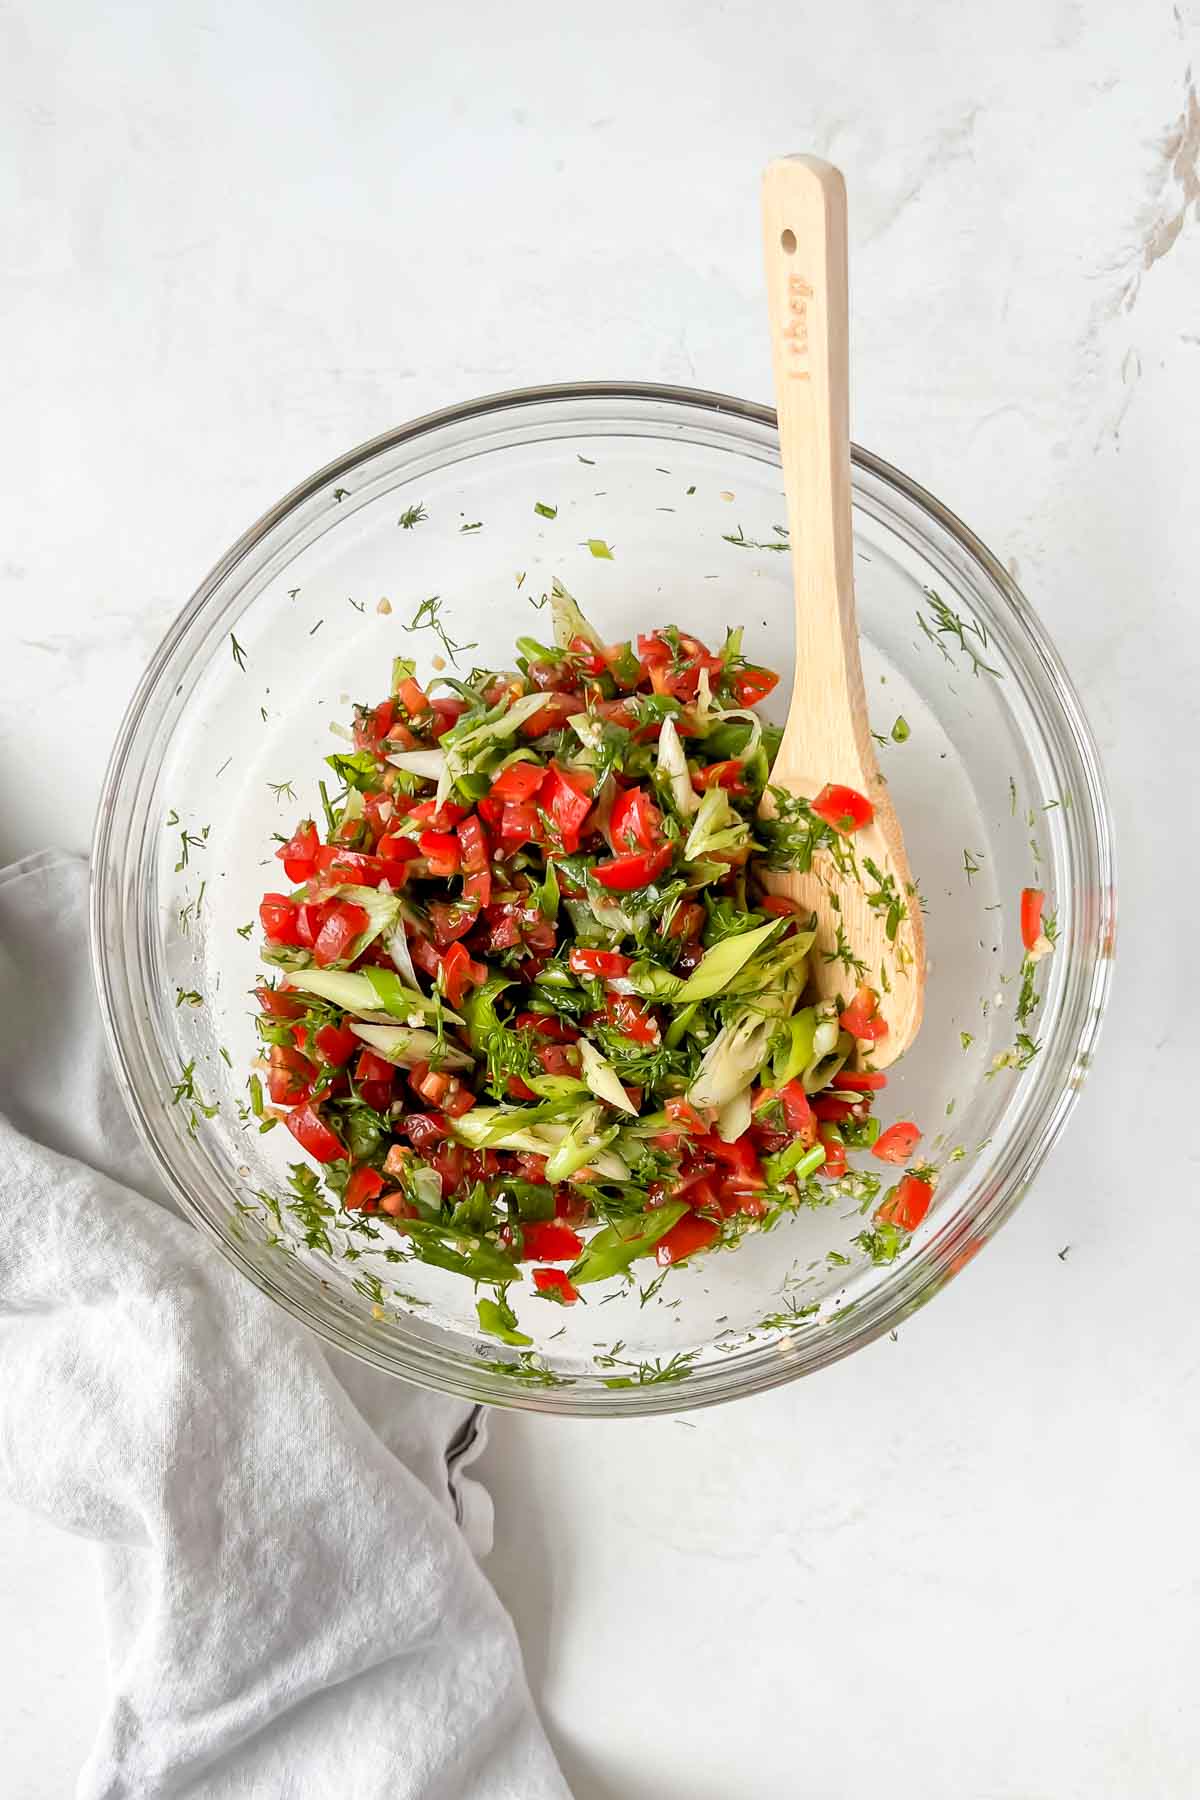 tomato relish ingredients tossed in clear glass mixing bowl.